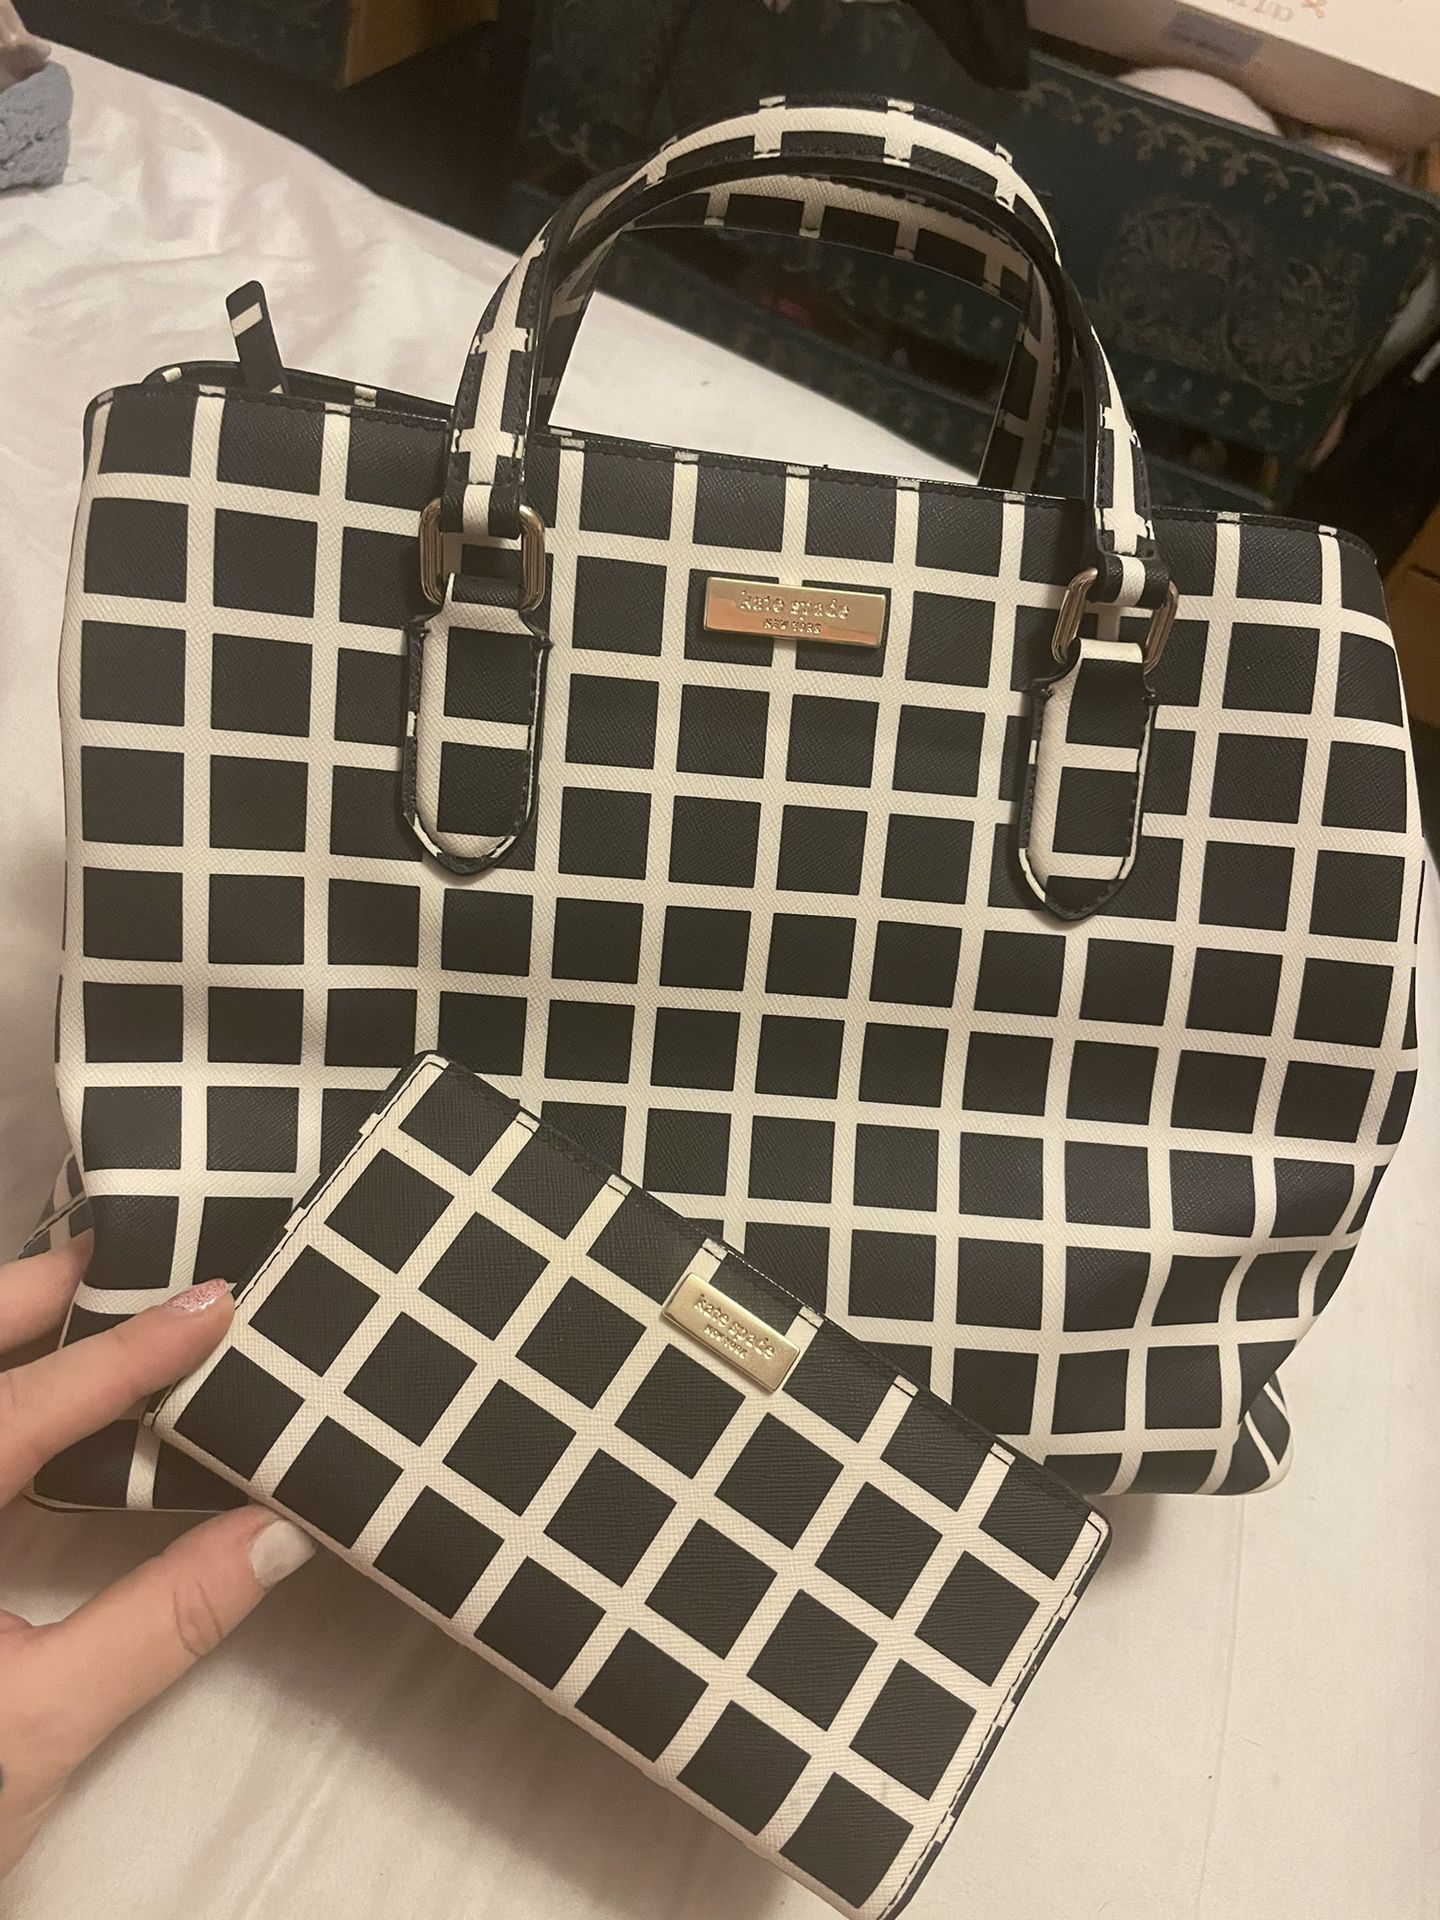 Kate Spade Satchel And Wallet 